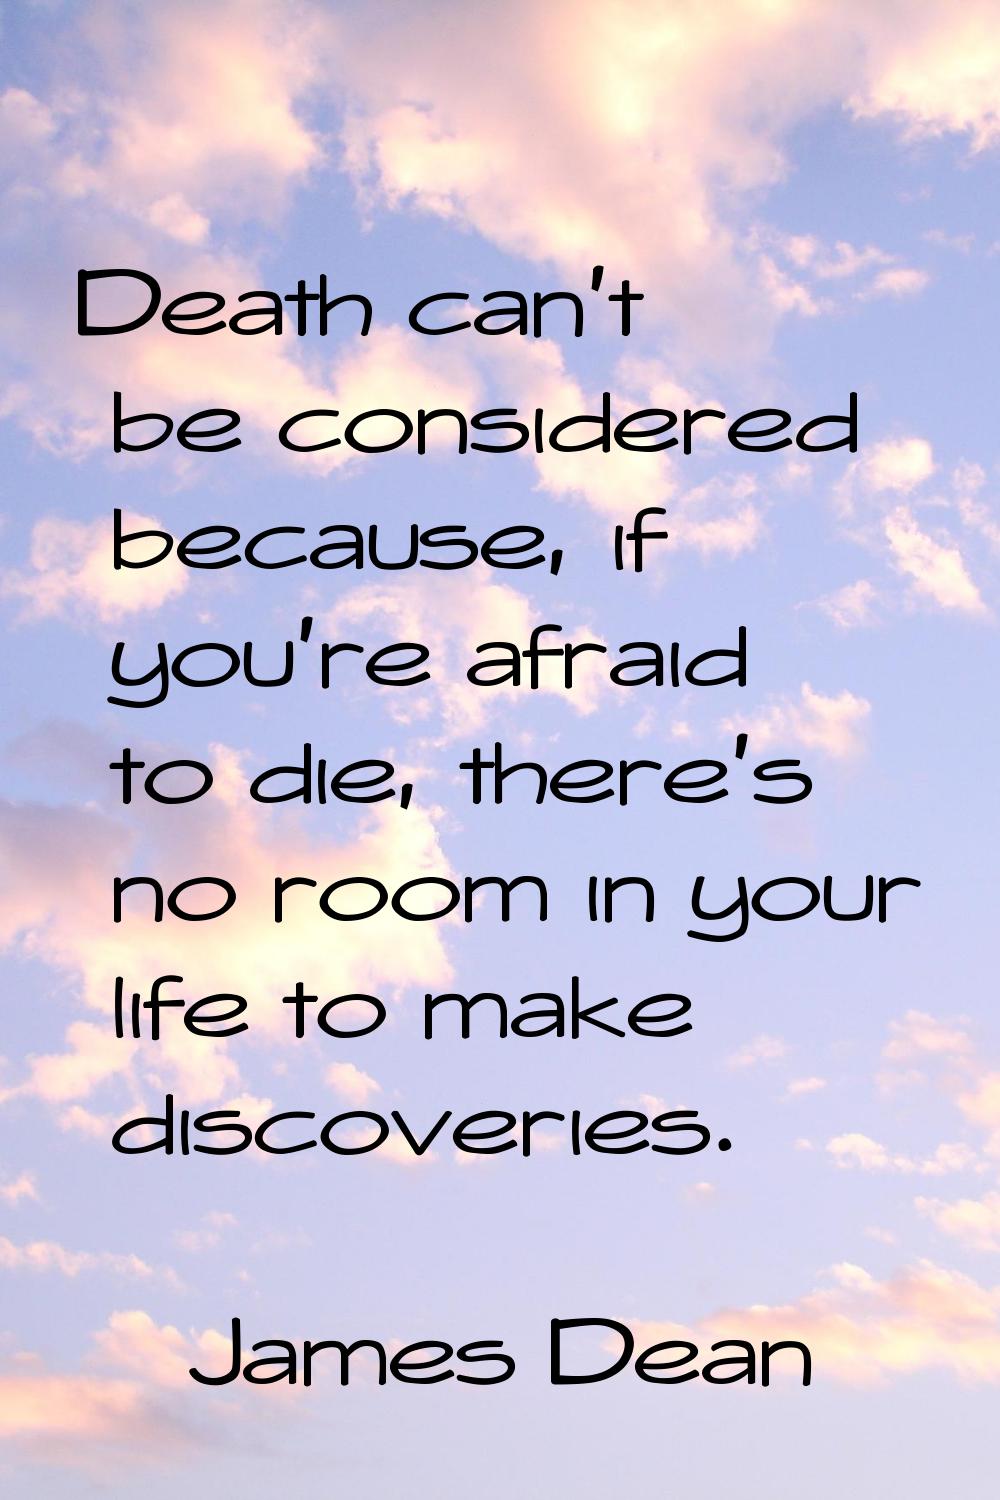 Death can't be considered because, if you're afraid to die, there's no room in your life to make di